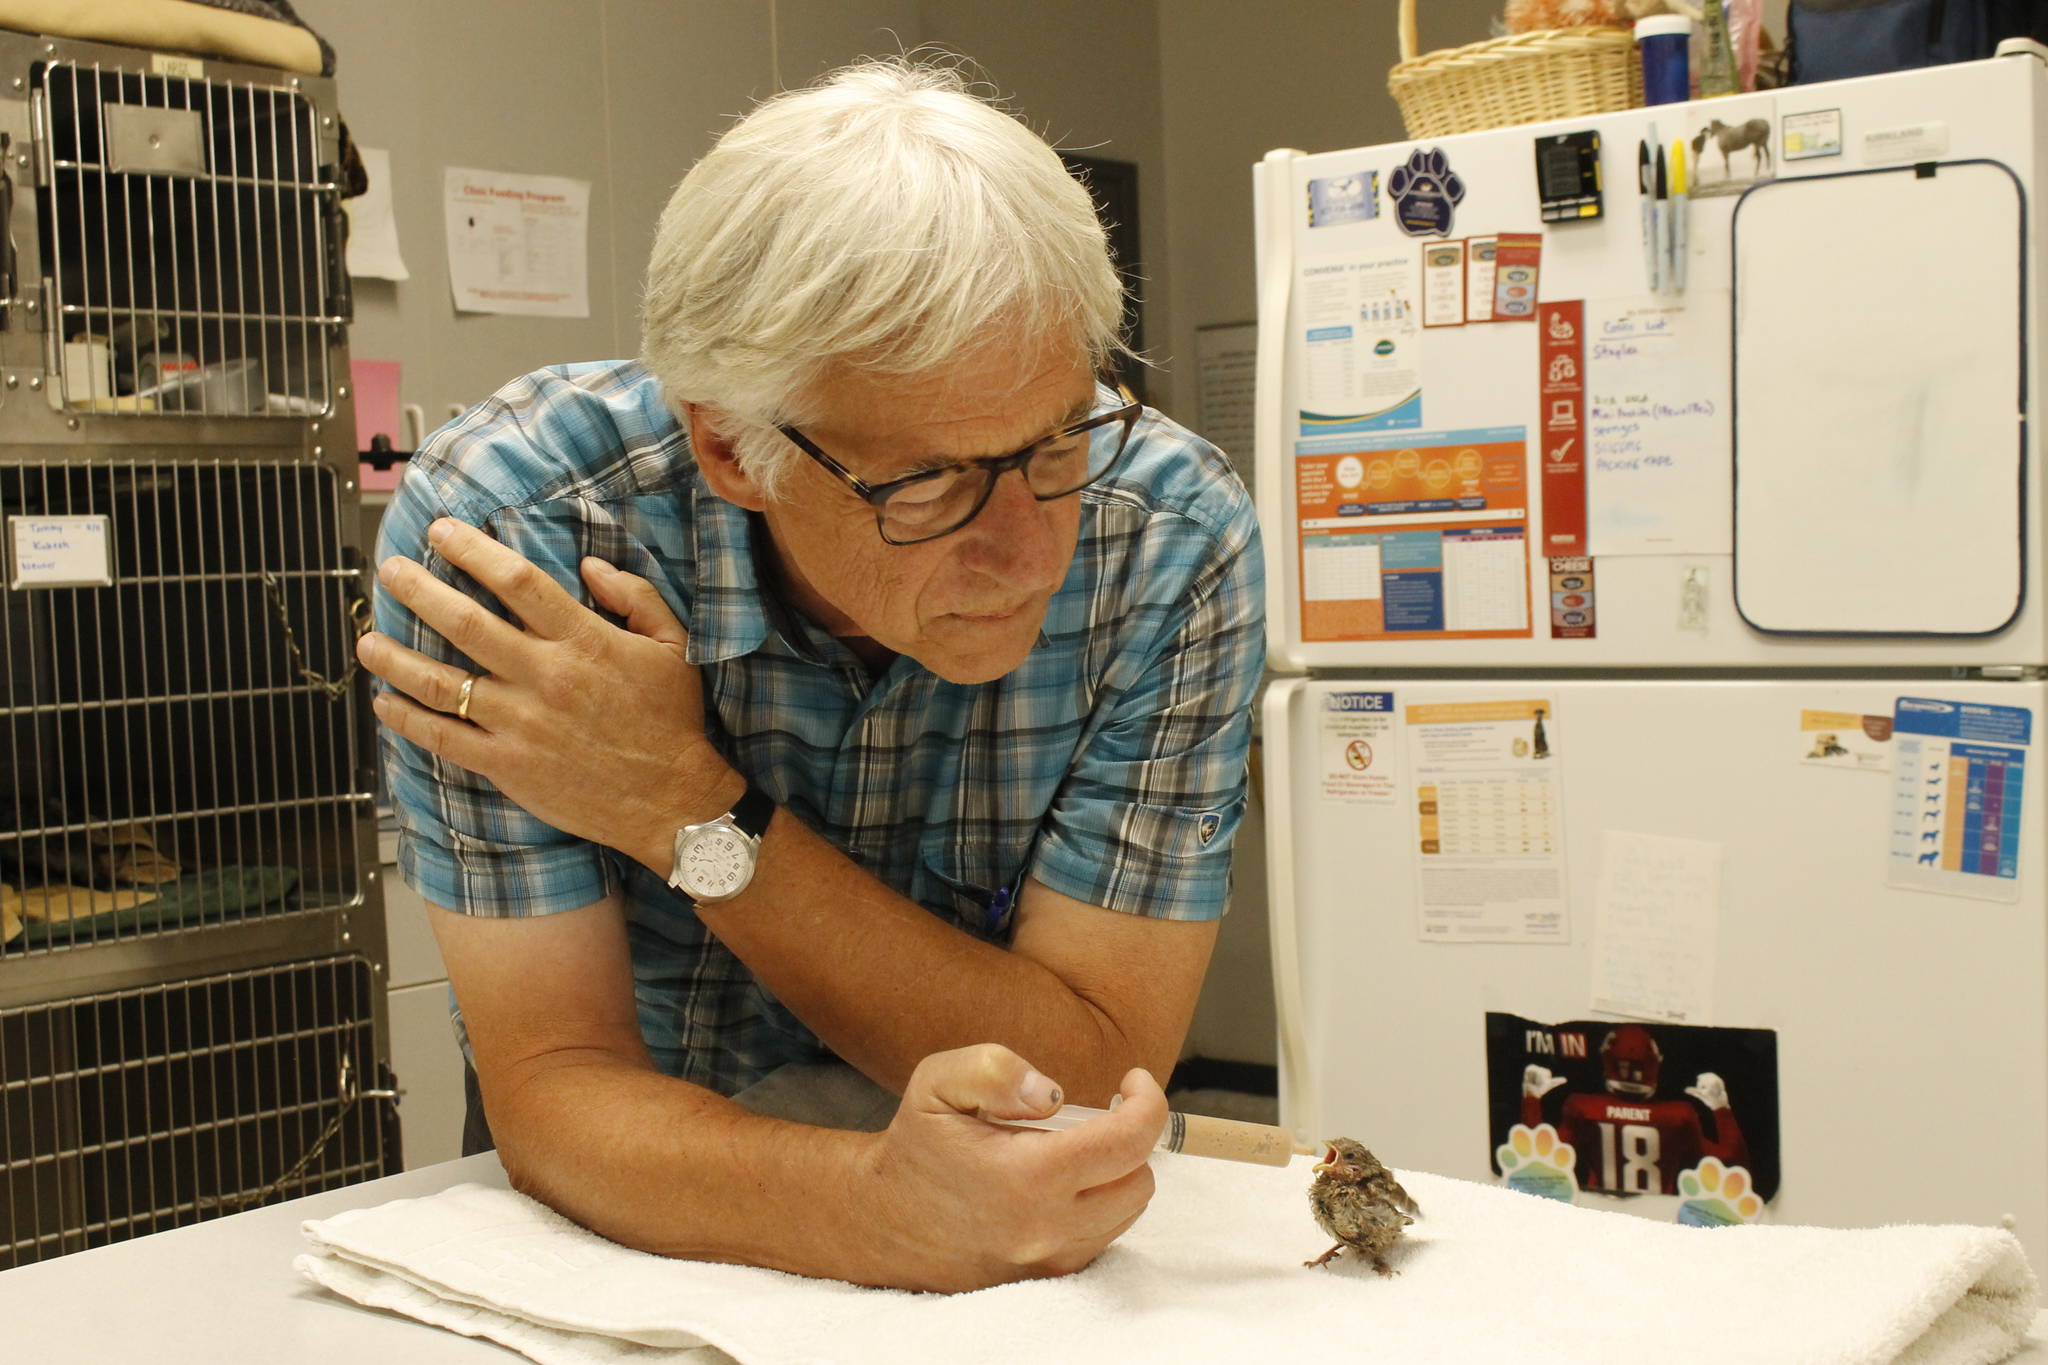 Photo by Kira Erickson/South Whidbey Record
Veterinarian David Parent feeds Jeffrey the house finch, who is receiving care after falling out of the nest. Parent, who is known for treating Whidbey wildlife, is set to retire Aug. 31 after a 31-year career at Useless Bay Animal Clinic.